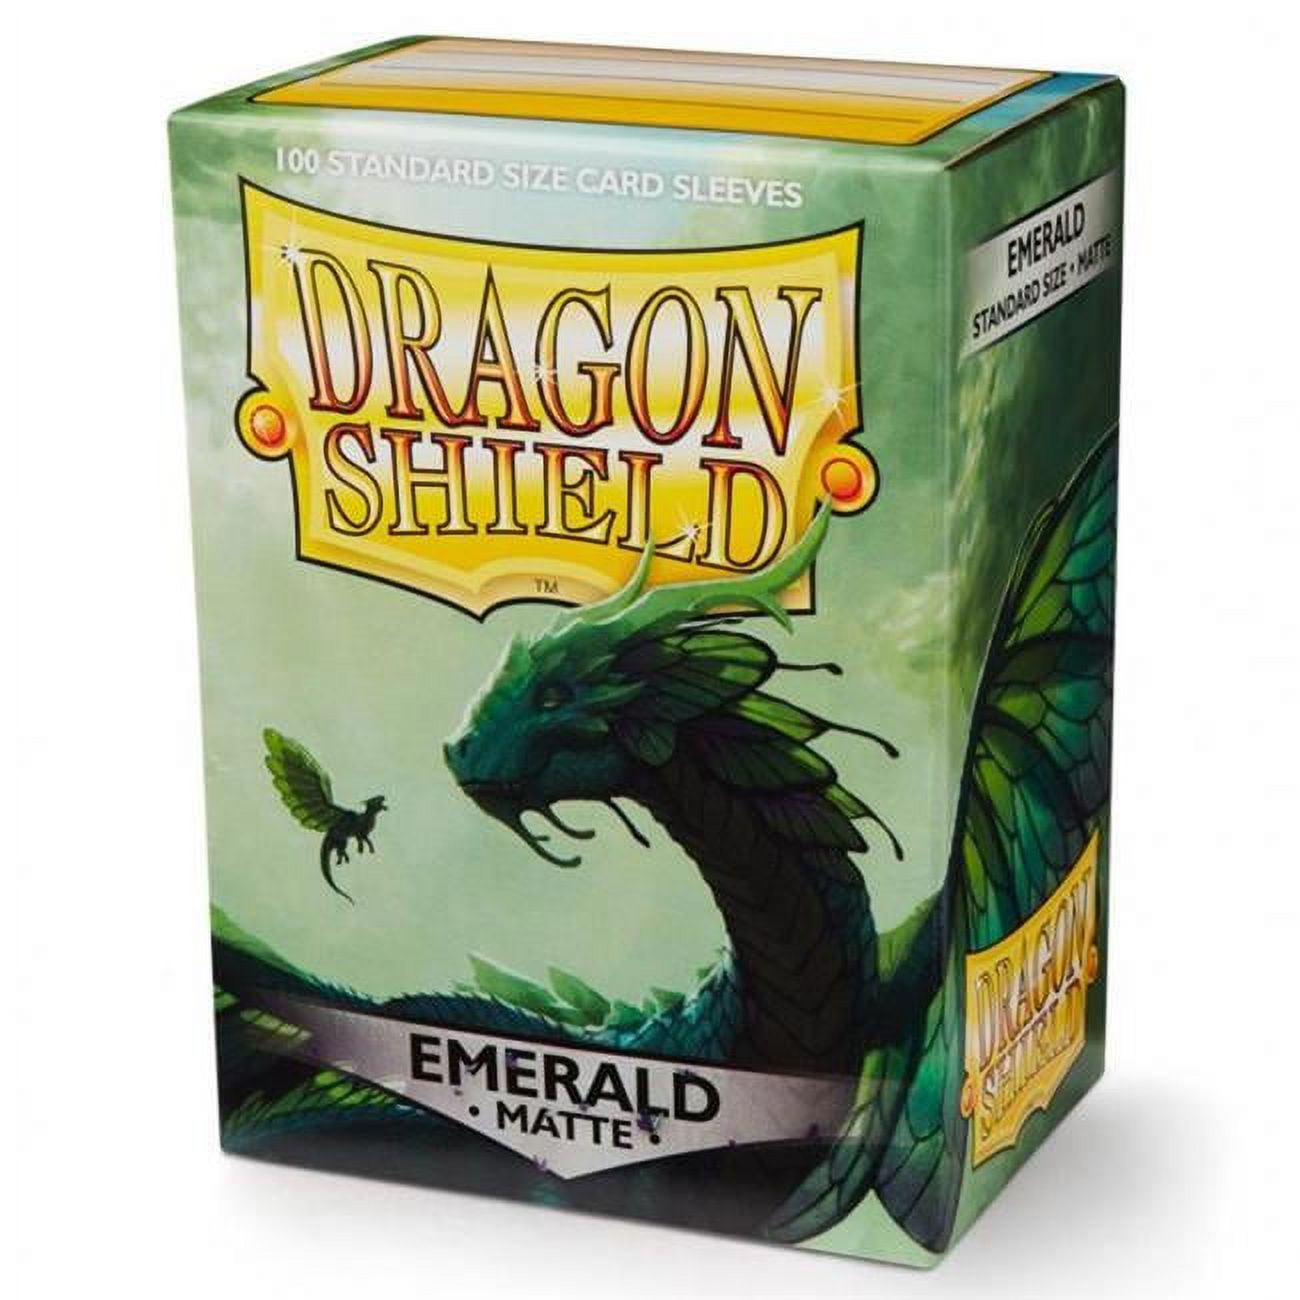 Atm11036 Dp - Dragon Shield Sleeves Playing Cards, Matte Emerald - 100 Sleeves Per Box